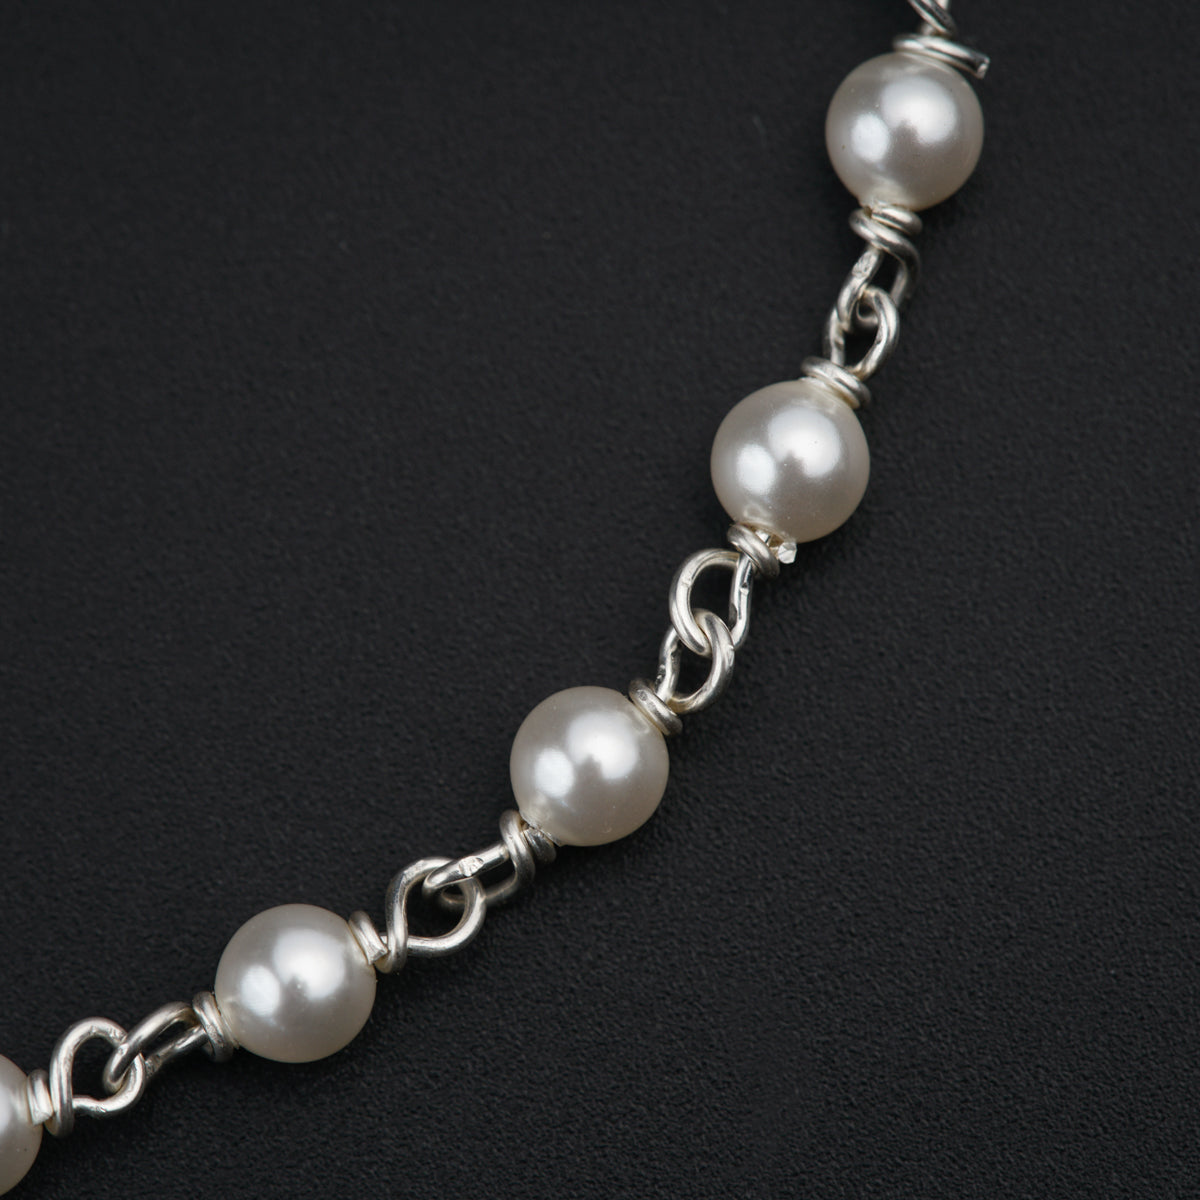 a white pearl necklace on a black background